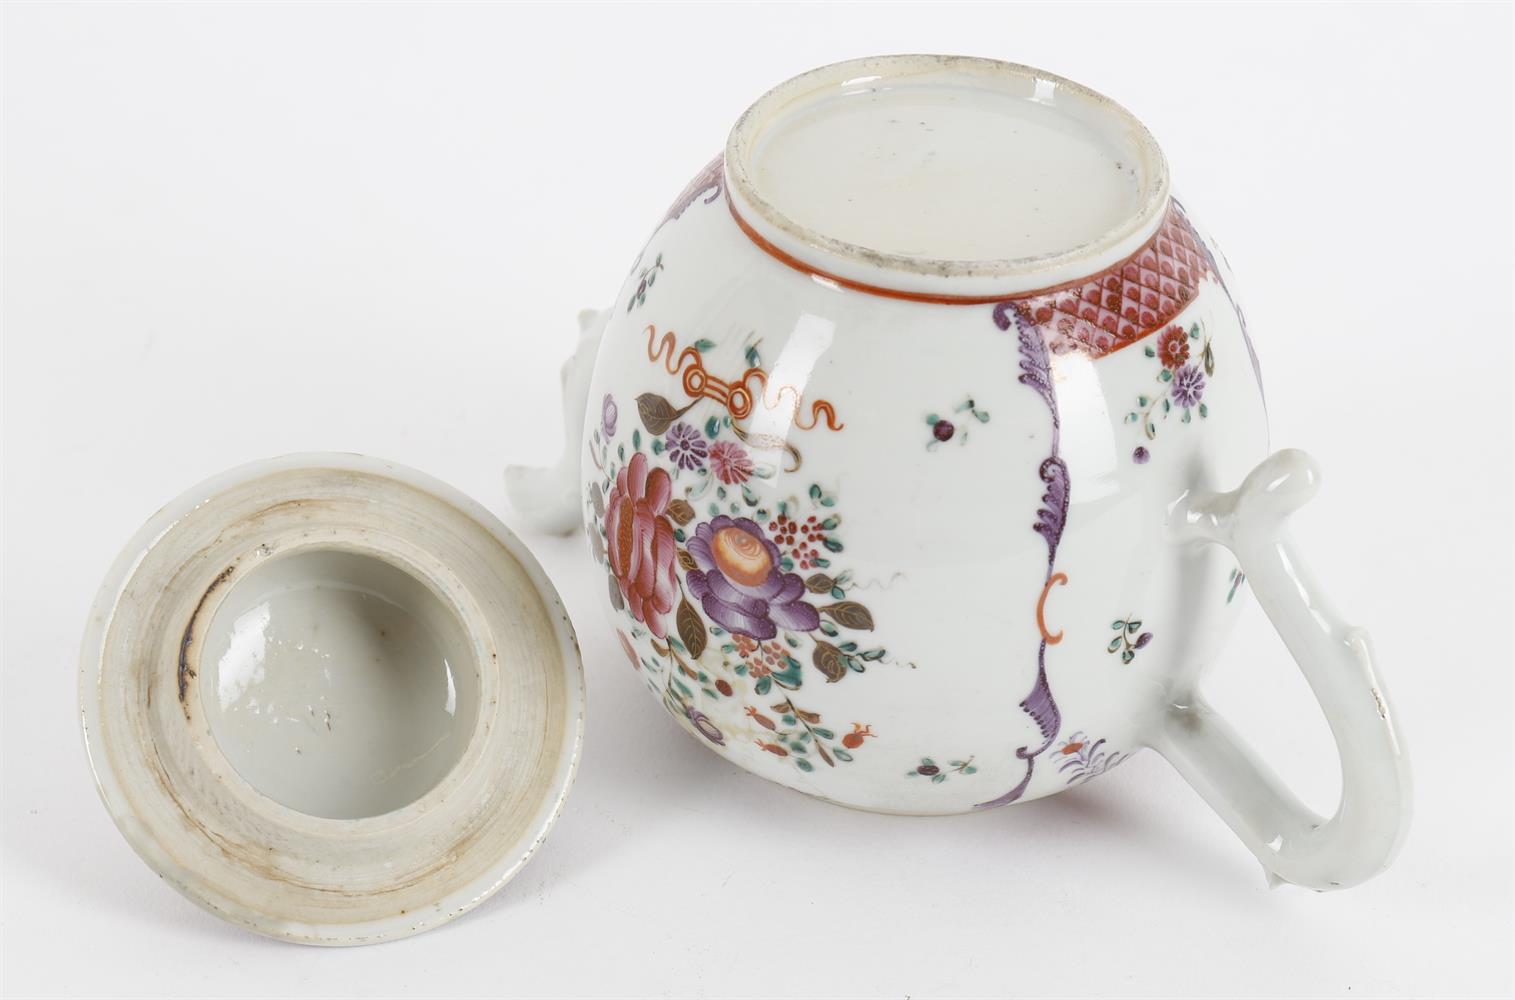 An 18th century Chinese export porcelain teapot and cover - Image 4 of 9